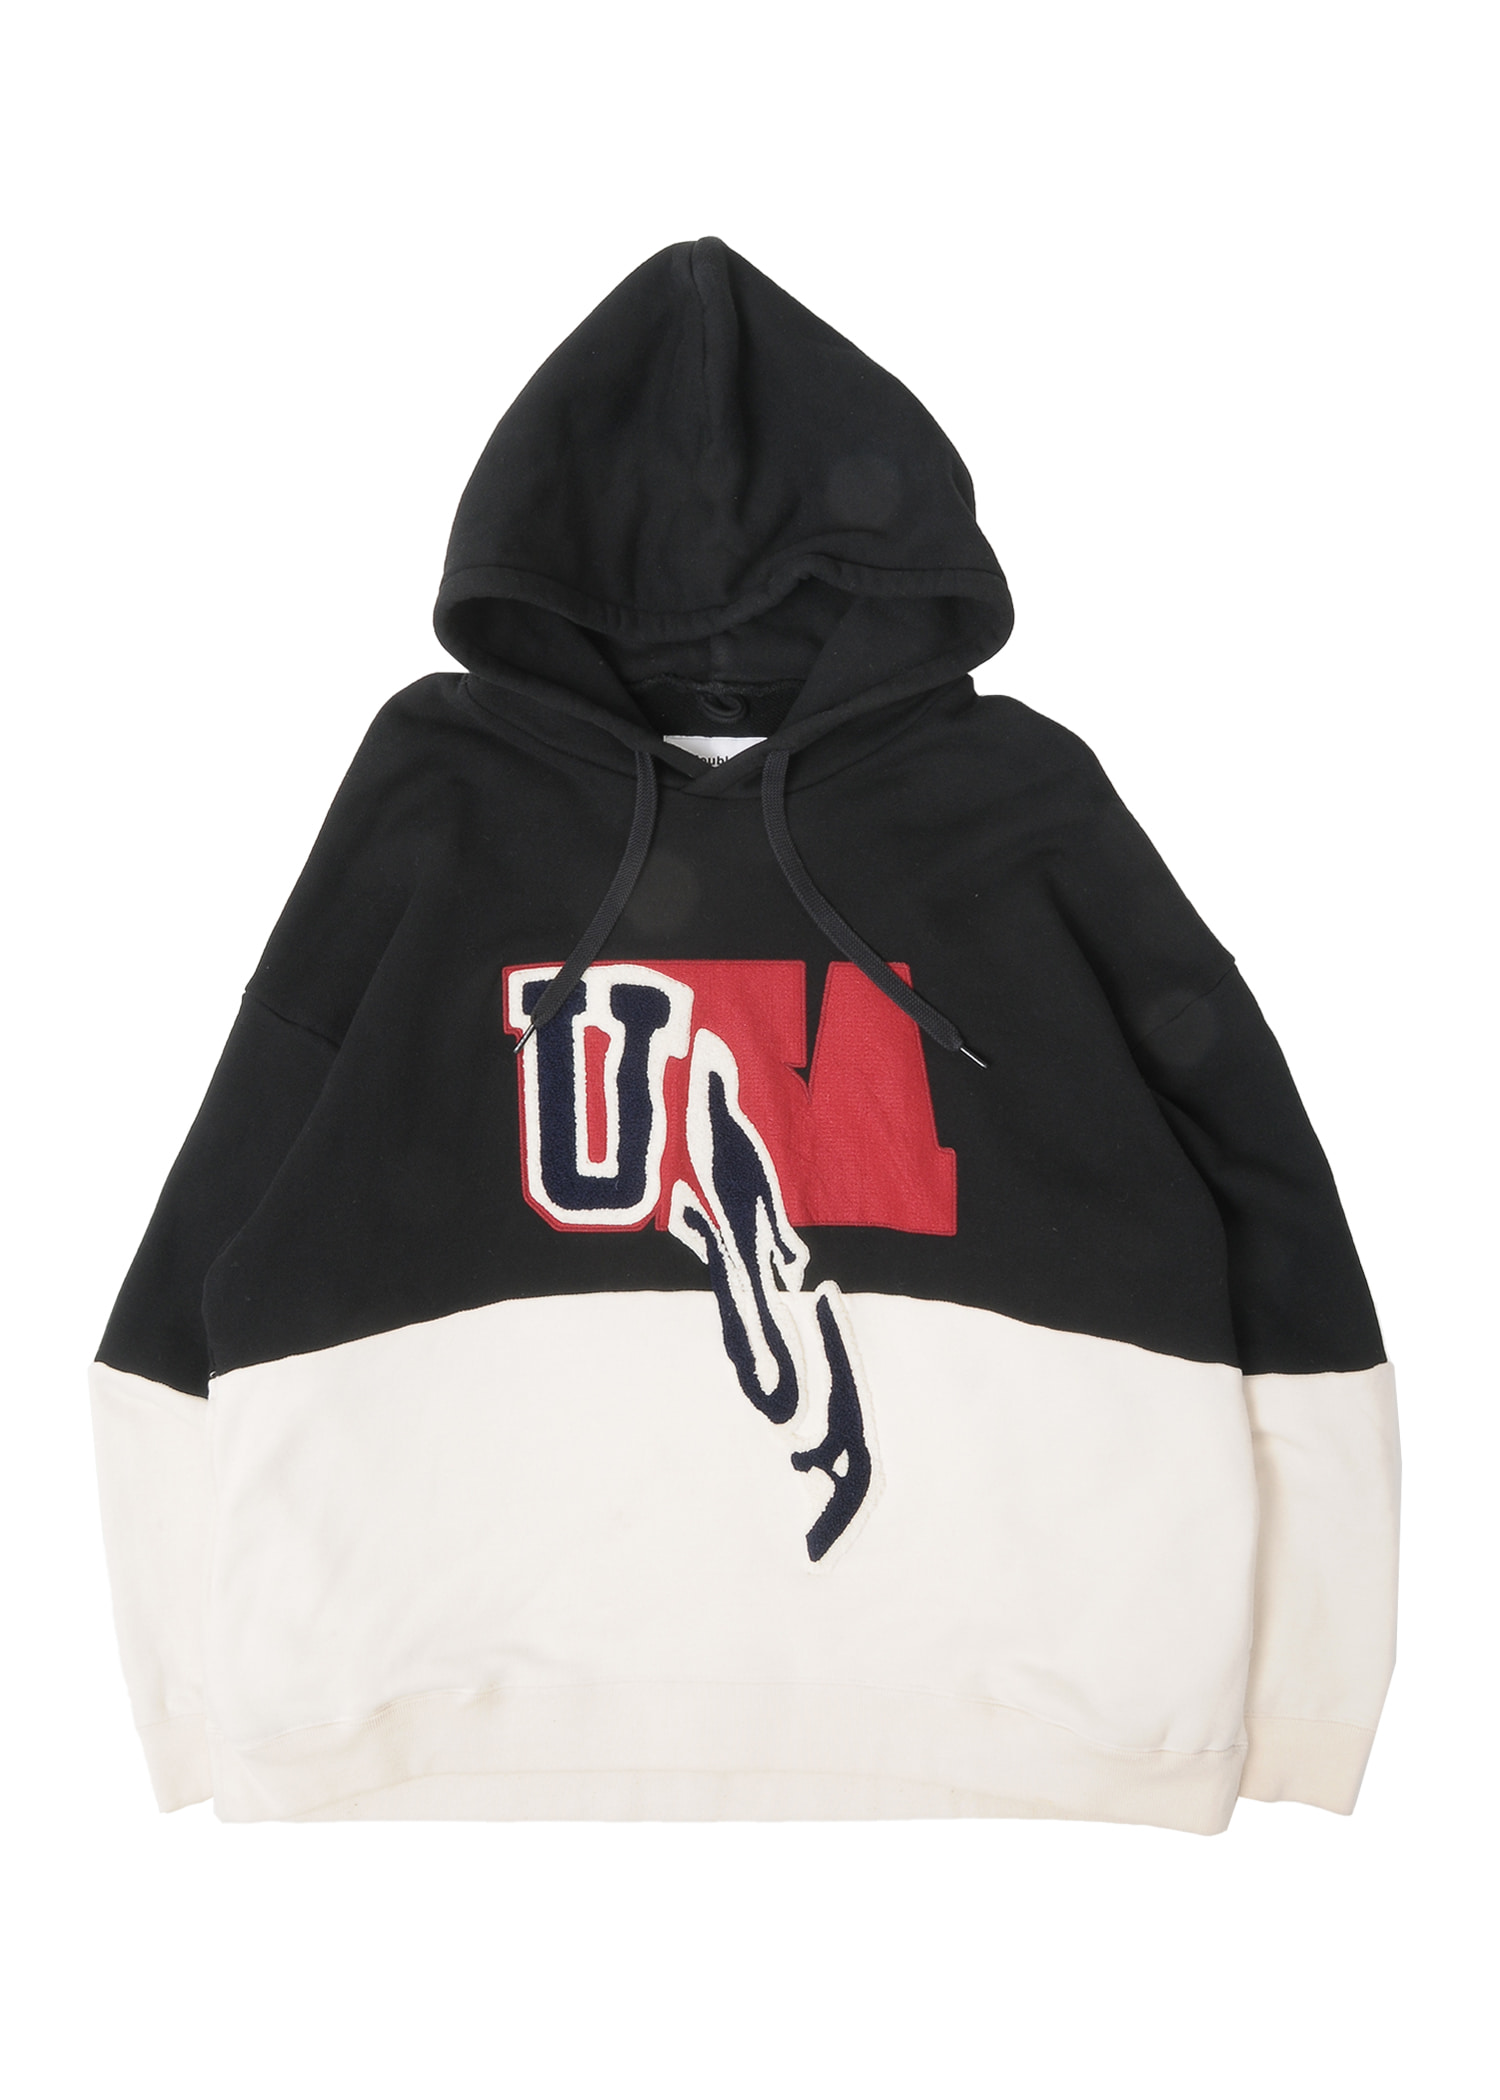 Doublet USA hoodie